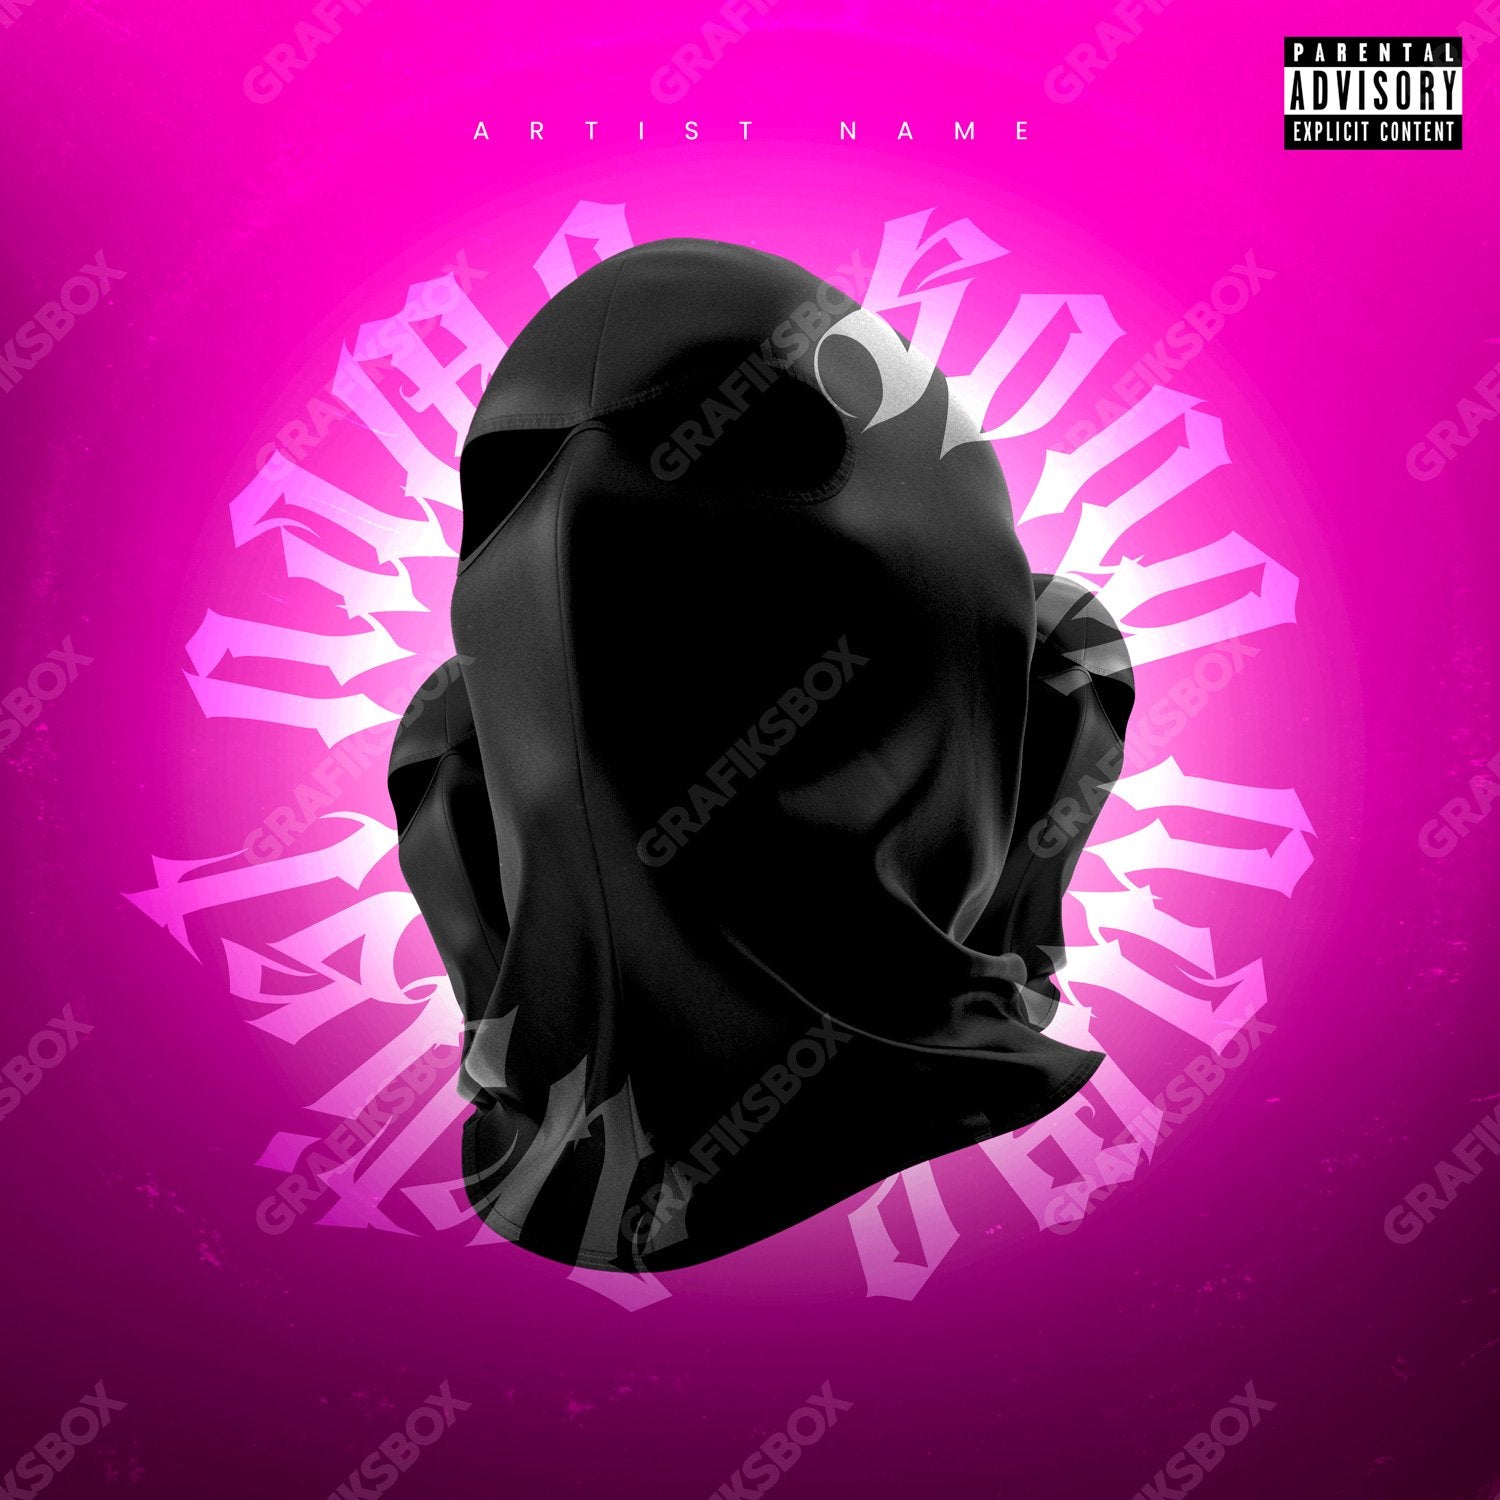 Pink Squad premade cover art